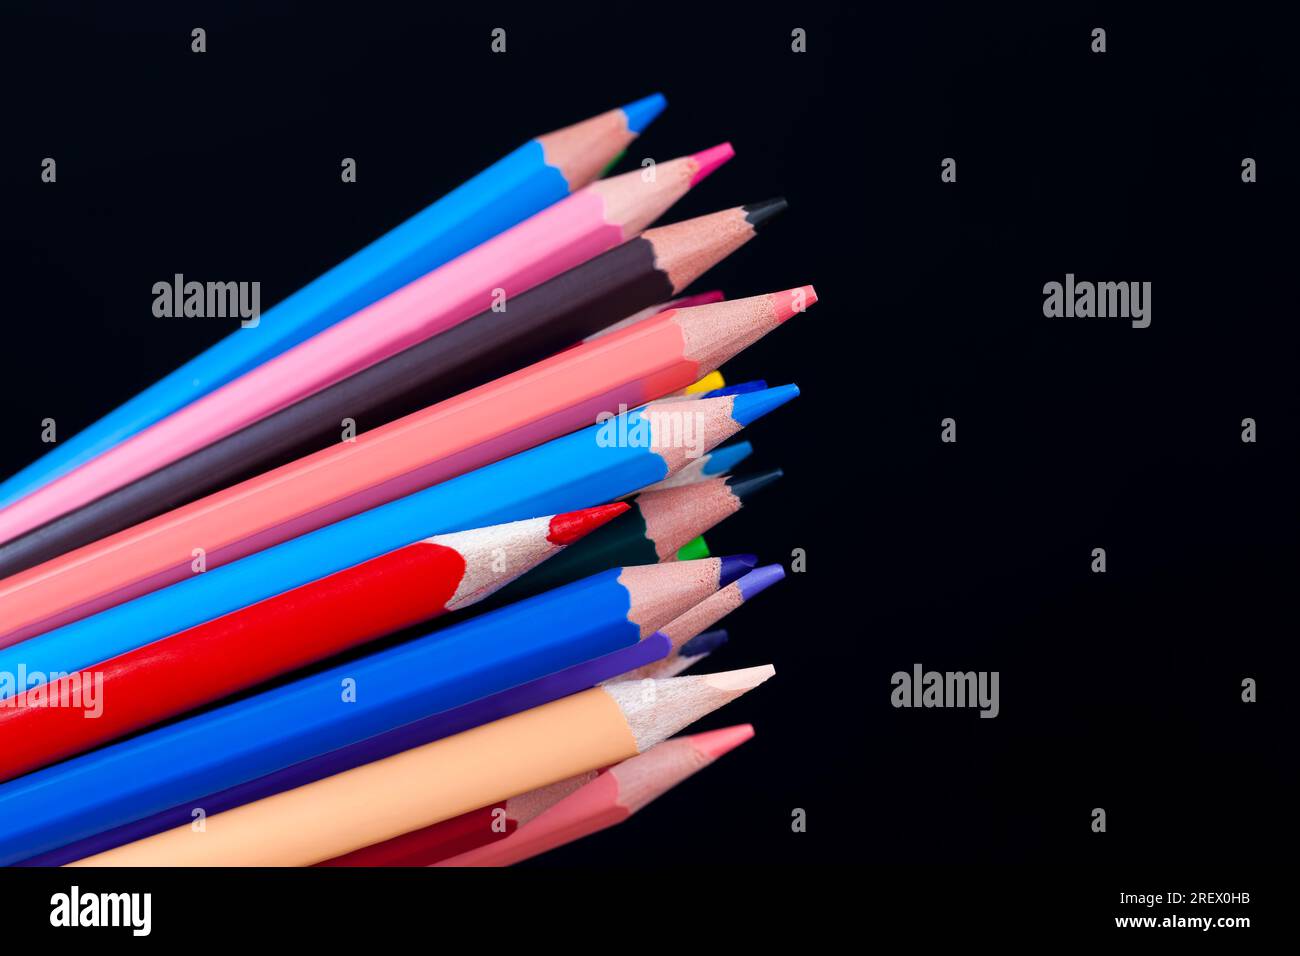 What is Colored Pencil Lead Made Of?